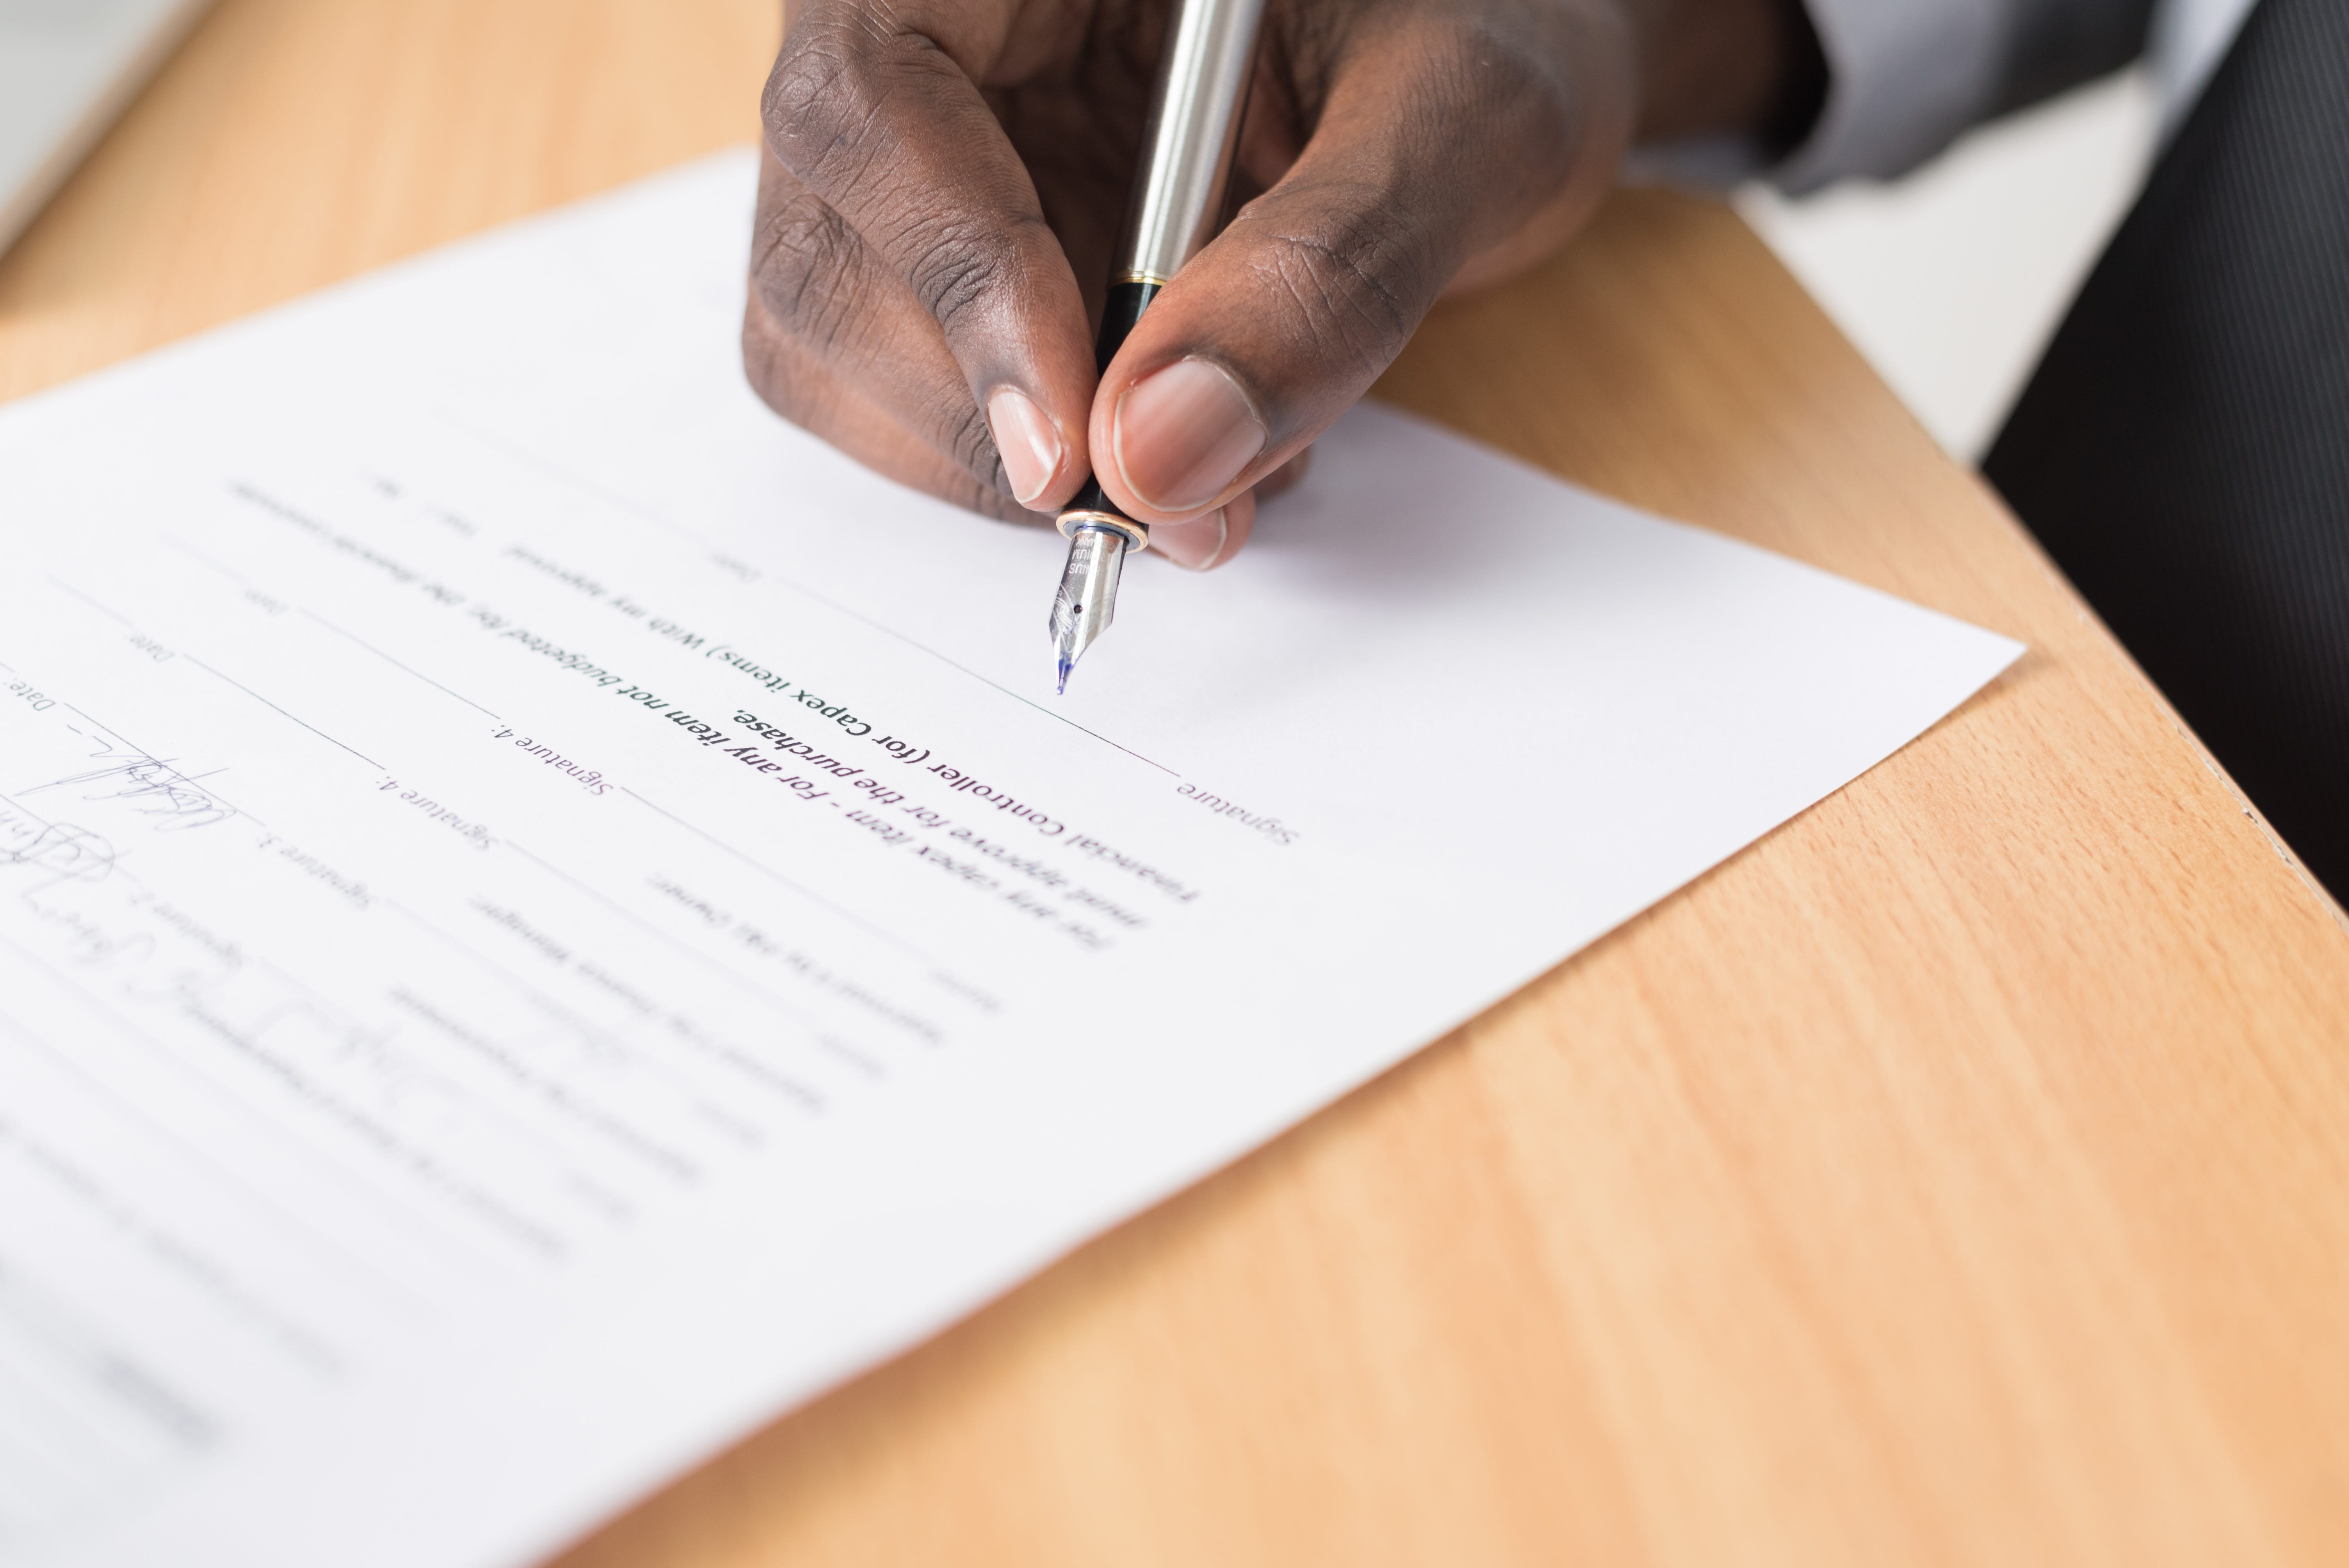 Man signing contract; image by Cytonn Photography, via Unsplash.com.